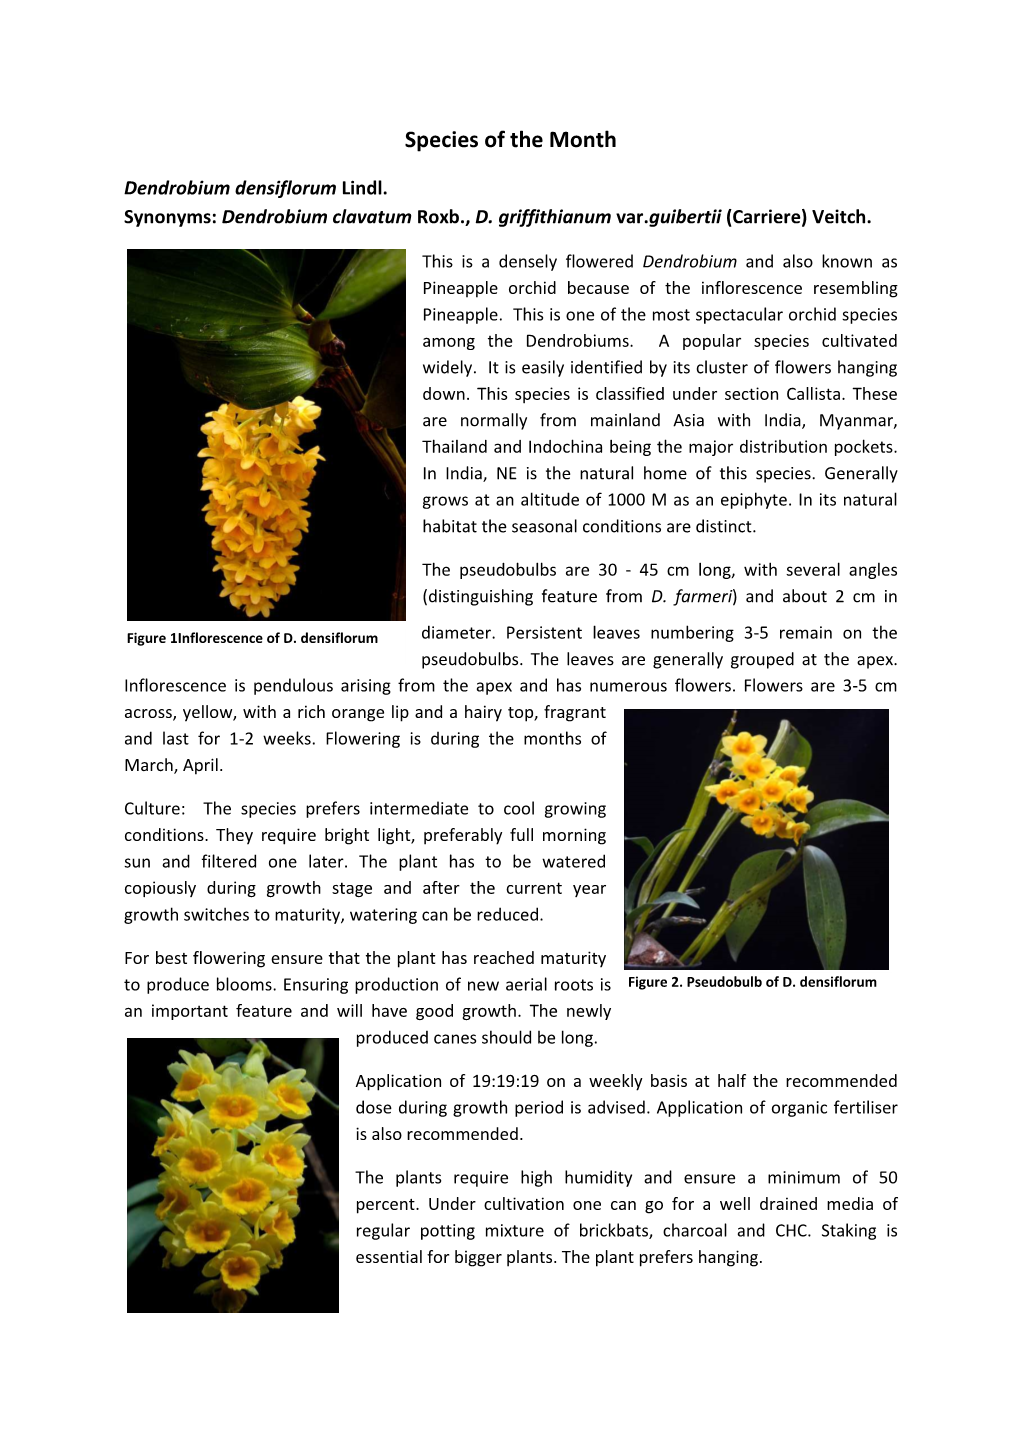 Species of the Month Dr Shashidhar March1